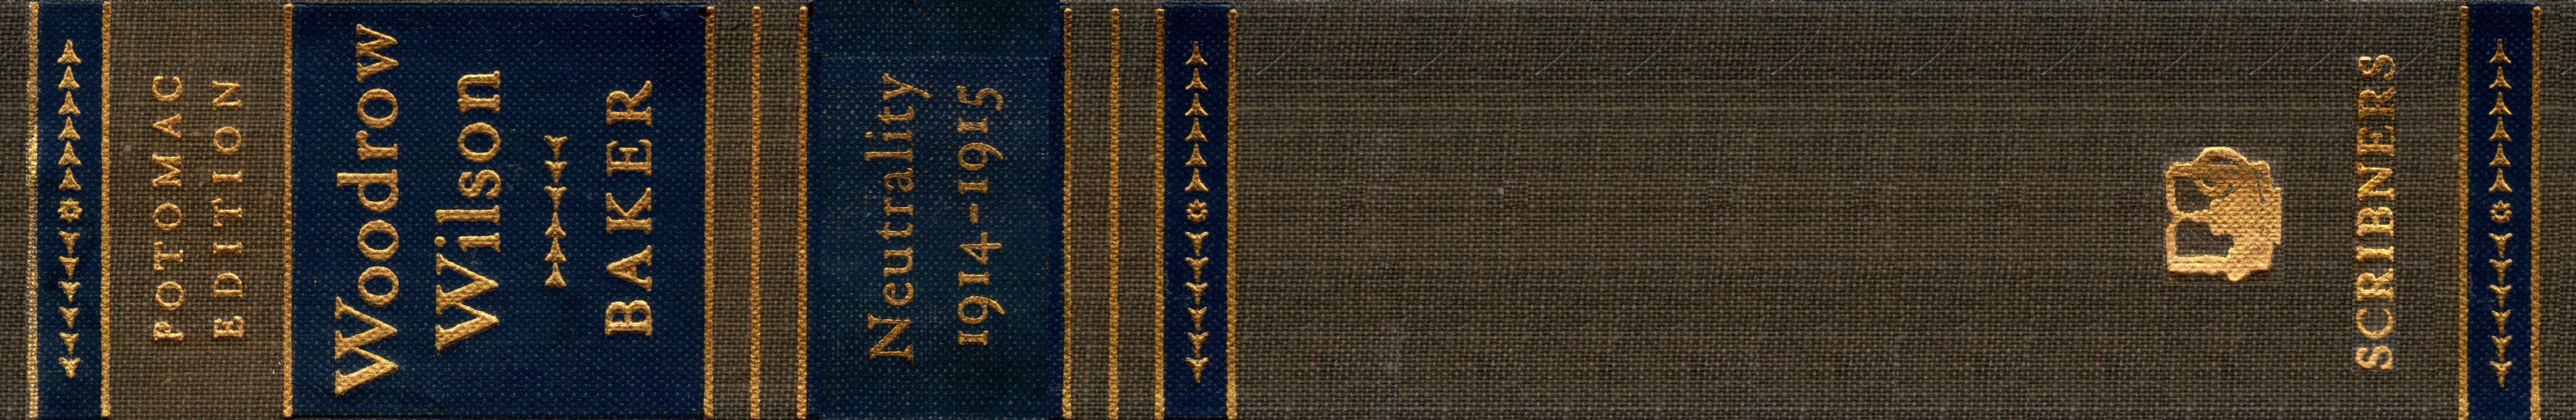 Image of the spine of Woodrow Wilson Life and Letters: Neutrality - 1914-15